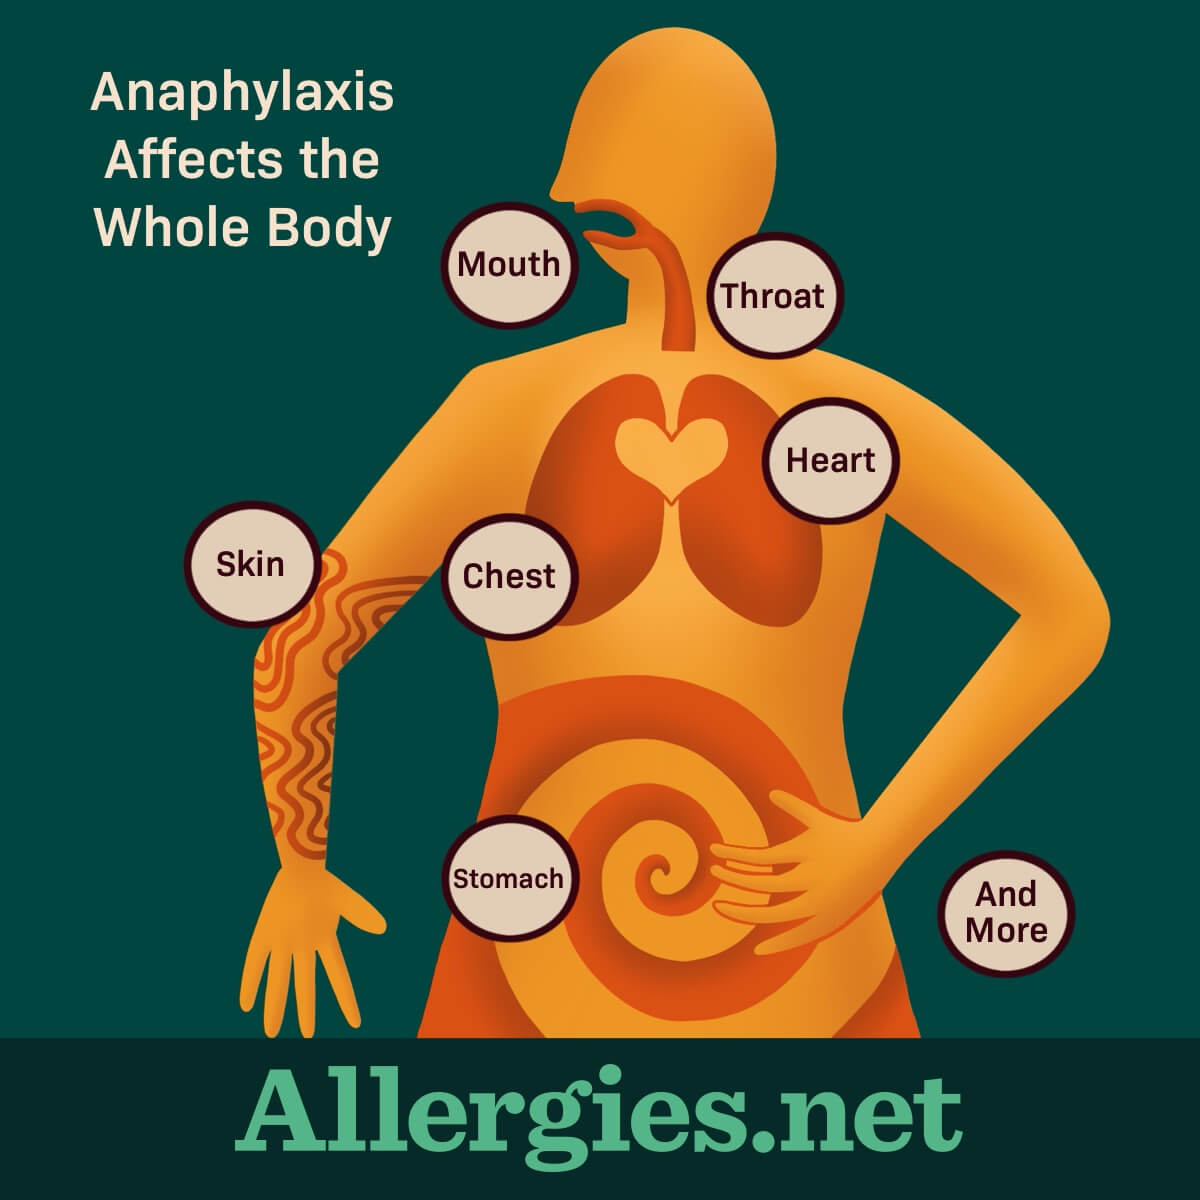 Anaphylaxis is a severe, life-threatening allergic reaction that affects multiple body systems at the same time.